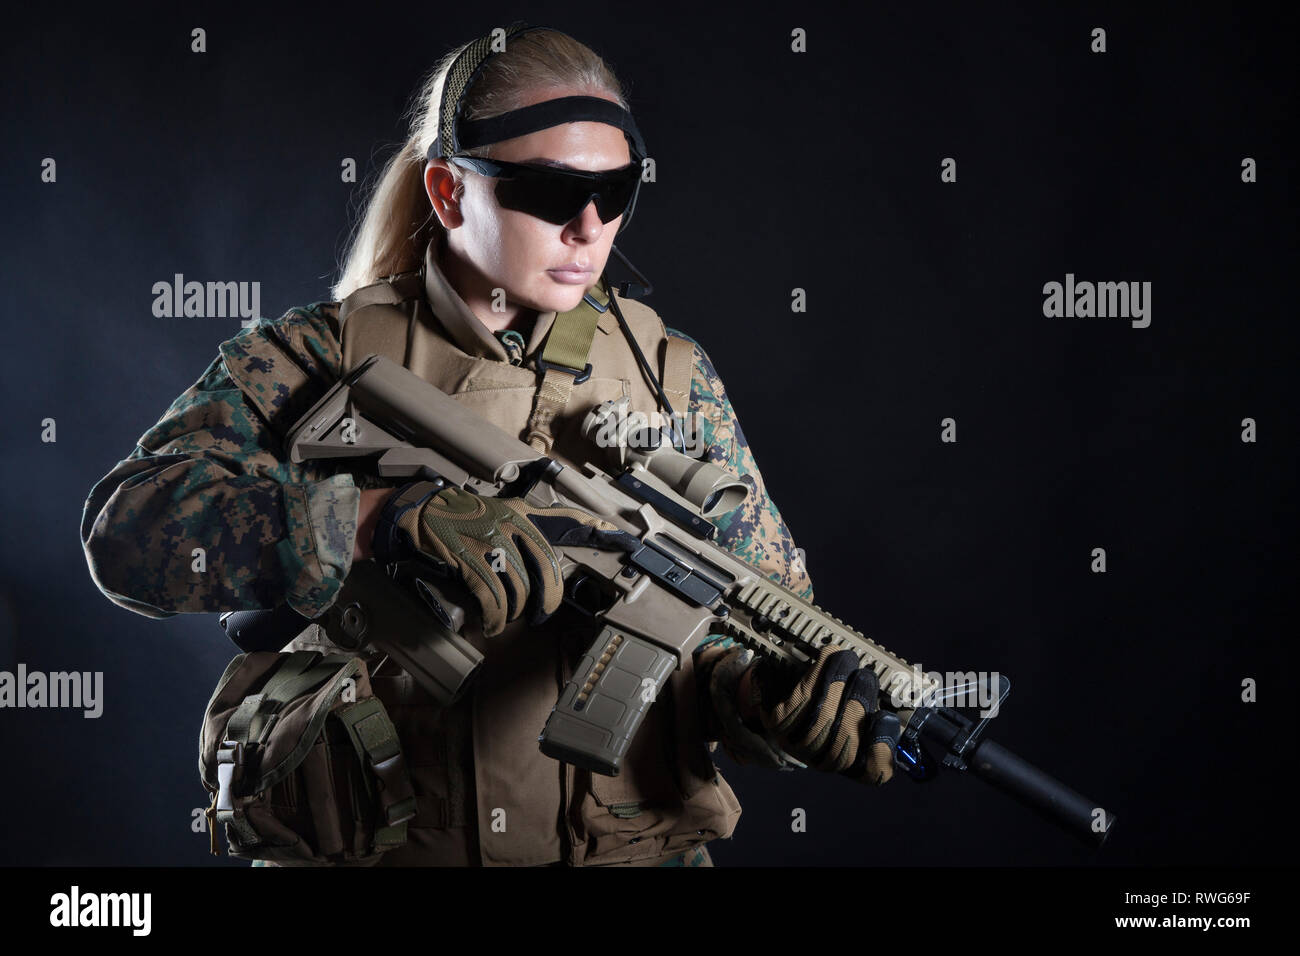 Female U.S. Marine in uniform, equipped with rifle. Stock Photo